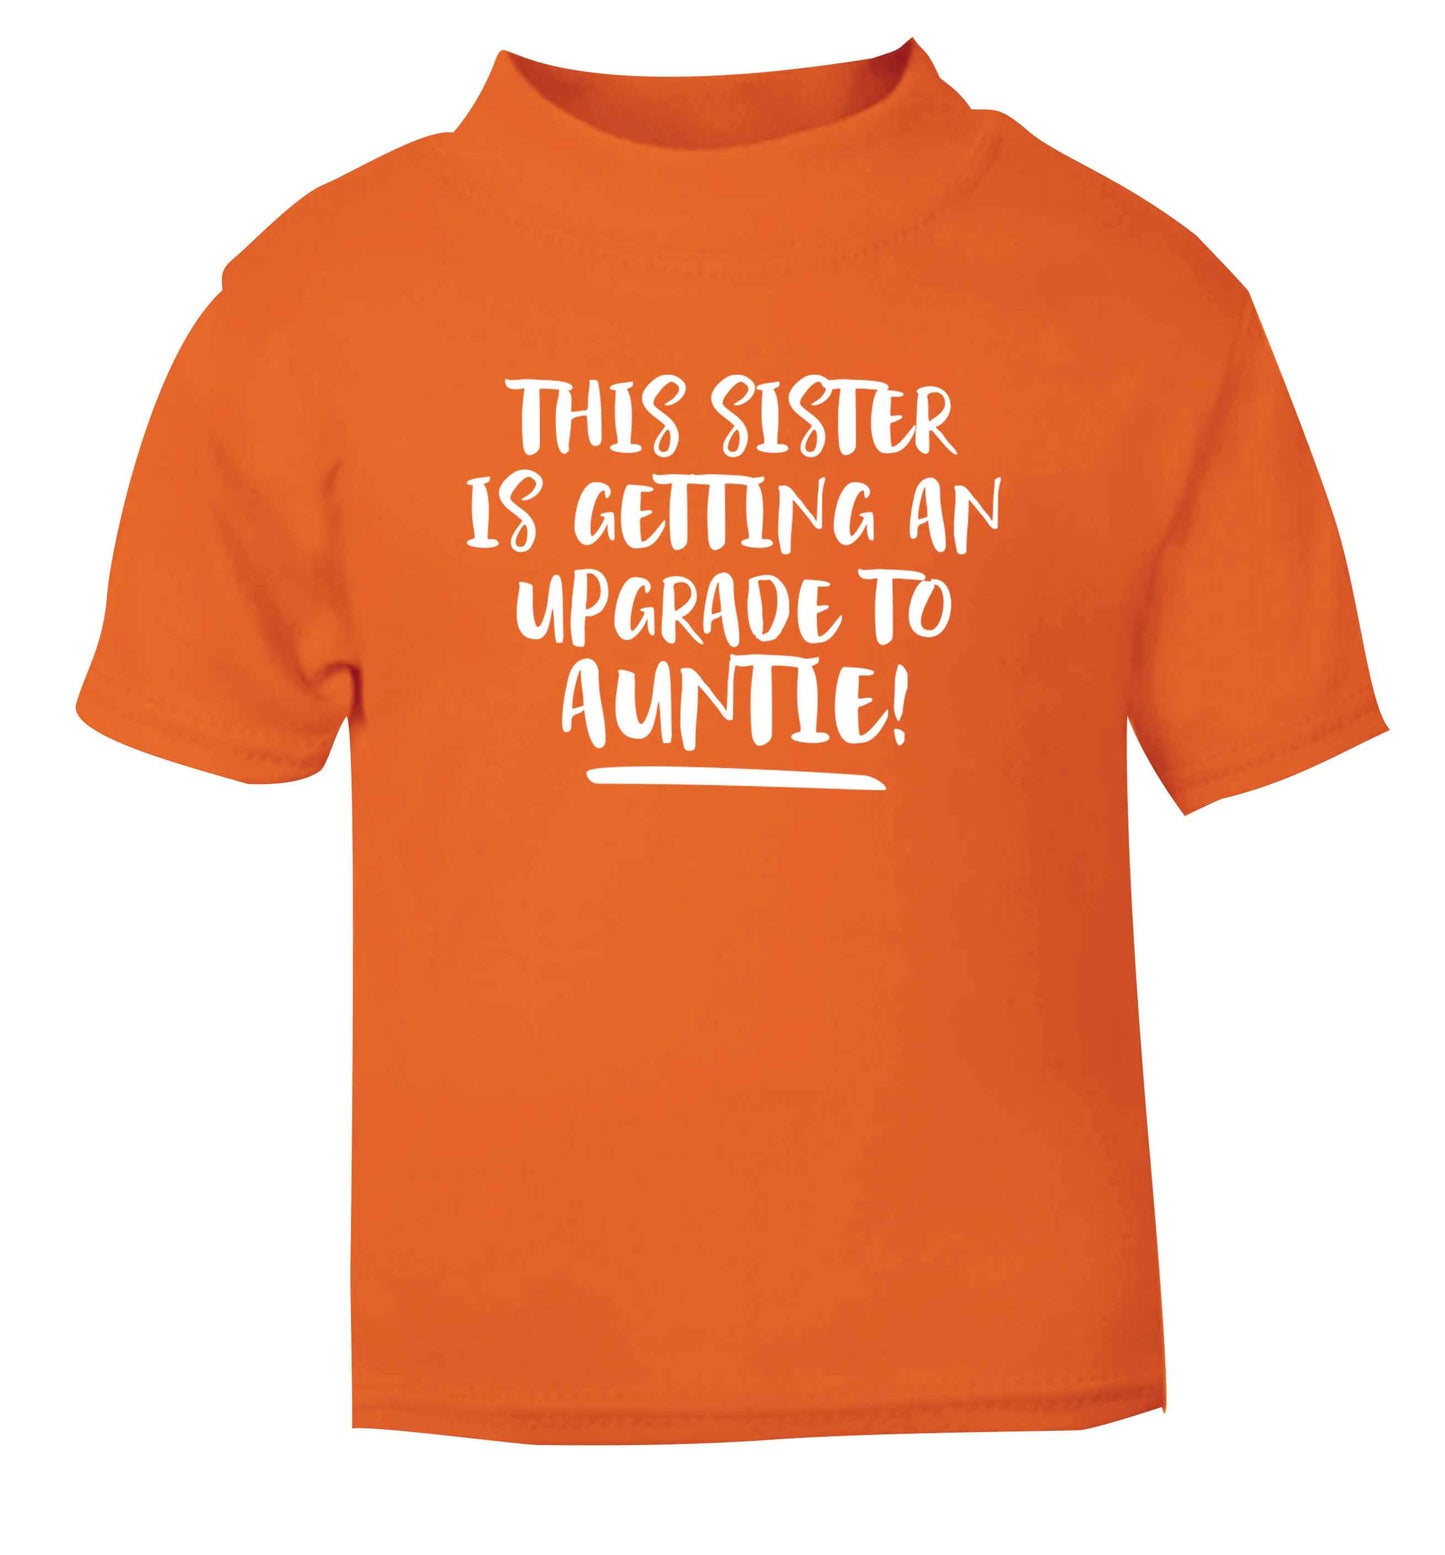 This sister is getting an upgrade to auntie! orange Baby Toddler Tshirt 2 Years